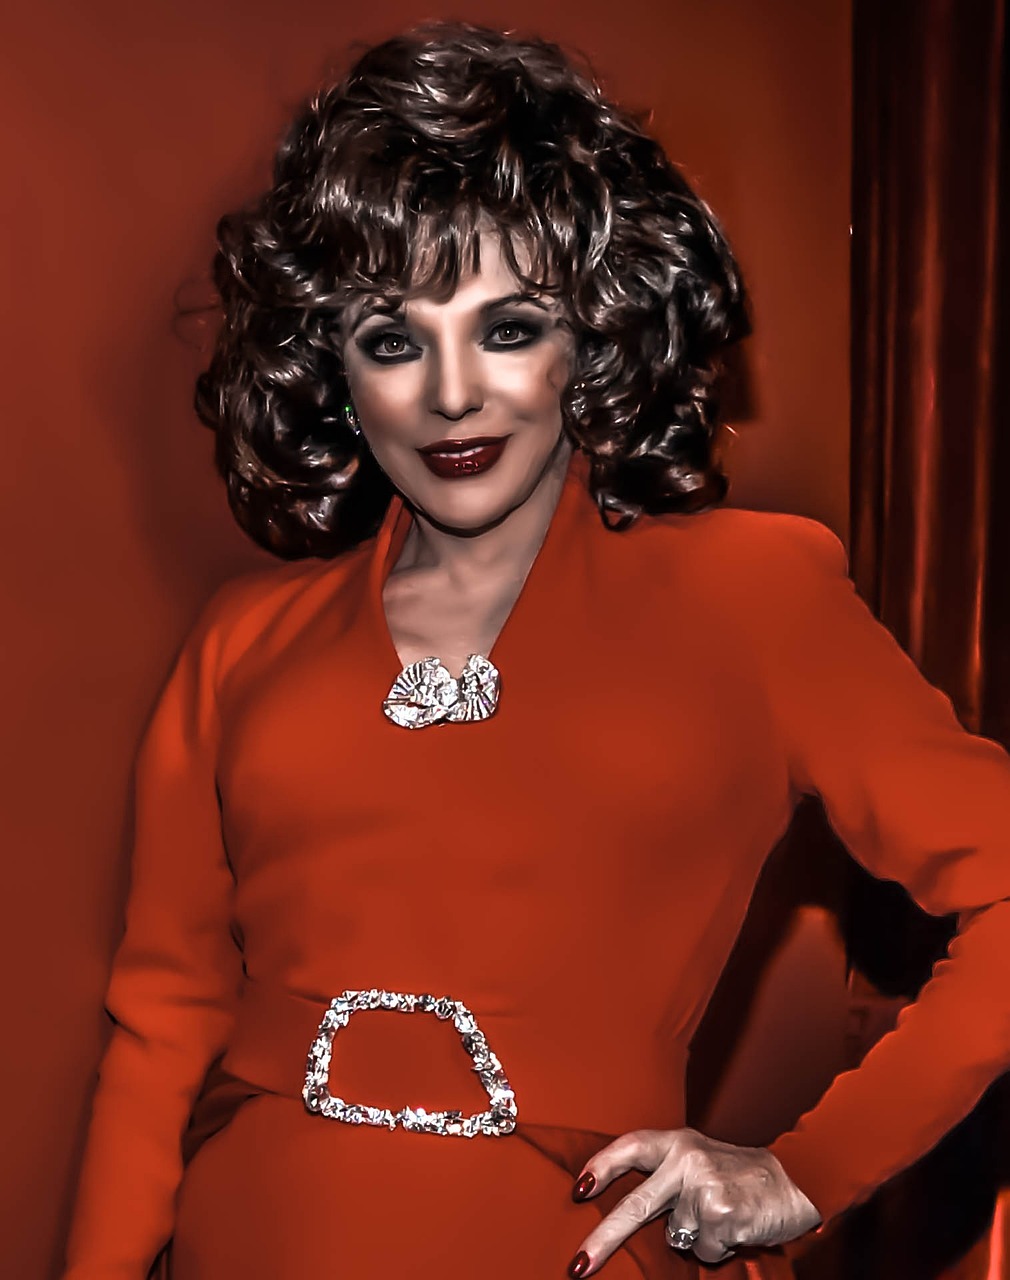 a woman in a red dress posing for a picture, a colorized photo, inspired by Myra Landau, ru paul\'s drag race, [ digital art ]!!, kylie minogue, elizabeth taylor